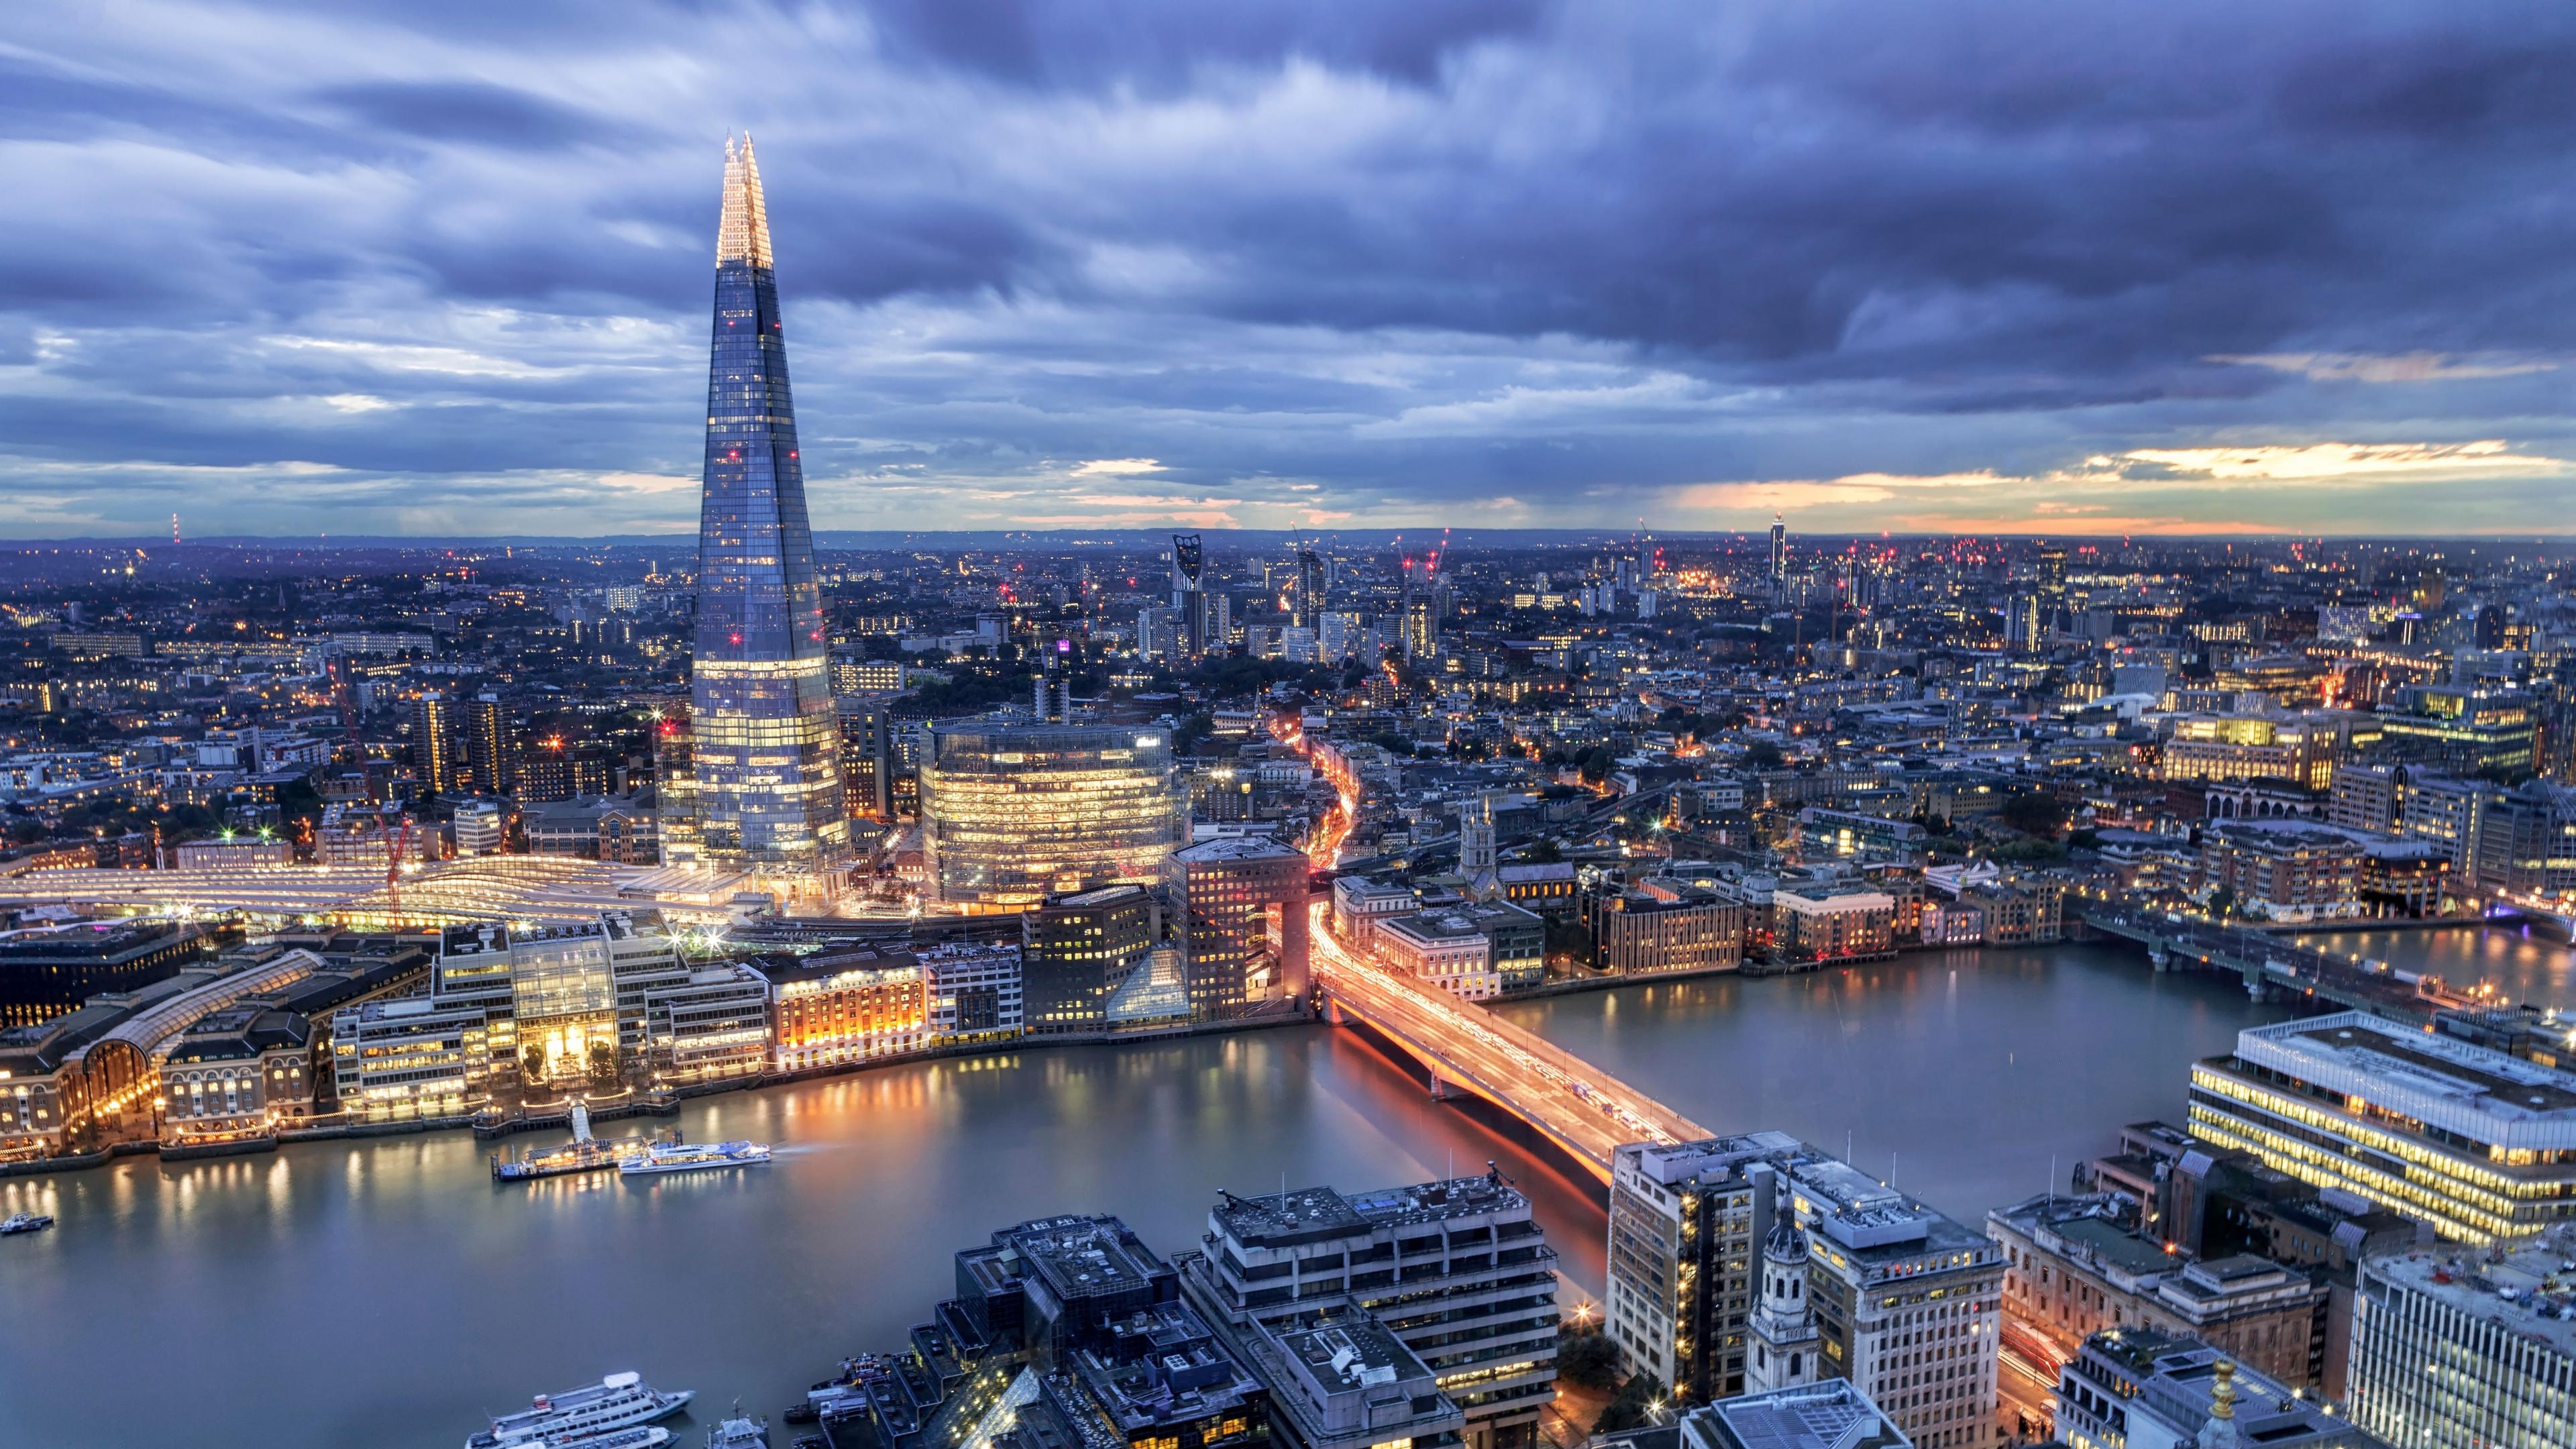 aerial view over London at dusk